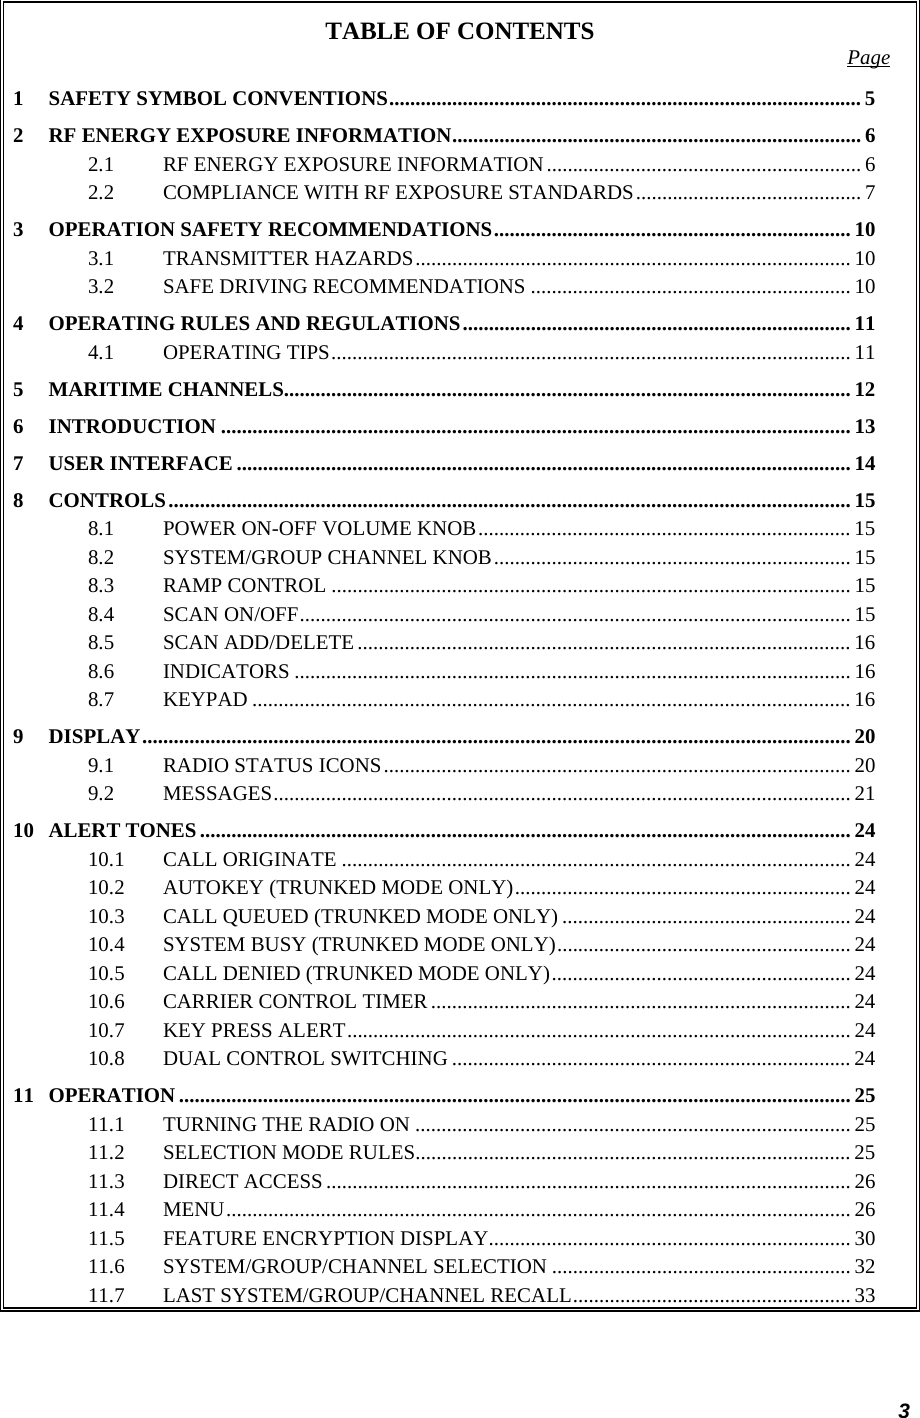 3 TABLE OF CONTENTS  Page 1 SAFETY SYMBOL CONVENTIONS.......................................................................................... 5 2 RF ENERGY EXPOSURE INFORMATION.............................................................................. 6 2.1 RF ENERGY EXPOSURE INFORMATION............................................................ 6 2.2 COMPLIANCE WITH RF EXPOSURE STANDARDS........................................... 7 3 OPERATION SAFETY RECOMMENDATIONS.................................................................... 10 3.1 TRANSMITTER HAZARDS................................................................................... 10 3.2 SAFE DRIVING RECOMMENDATIONS ............................................................. 10 4 OPERATING RULES AND REGULATIONS.......................................................................... 11 4.1 OPERATING TIPS................................................................................................... 11 5 MARITIME CHANNELS............................................................................................................ 12 6 INTRODUCTION ........................................................................................................................ 13 7 USER INTERFACE ..................................................................................................................... 14 8 CONTROLS.................................................................................................................................. 15 8.1 POWER ON-OFF VOLUME KNOB....................................................................... 15 8.2 SYSTEM/GROUP CHANNEL KNOB.................................................................... 15 8.3 RAMP CONTROL ................................................................................................... 15 8.4 SCAN ON/OFF......................................................................................................... 15 8.5 SCAN ADD/DELETE.............................................................................................. 16 8.6 INDICATORS .......................................................................................................... 16 8.7 KEYPAD .................................................................................................................. 16 9 DISPLAY....................................................................................................................................... 20 9.1 RADIO STATUS ICONS......................................................................................... 20 9.2 MESSAGES.............................................................................................................. 21 10 ALERT TONES............................................................................................................................ 24 10.1 CALL ORIGINATE .................................................................................................24 10.2 AUTOKEY (TRUNKED MODE ONLY)................................................................ 24 10.3 CALL QUEUED (TRUNKED MODE ONLY) ....................................................... 24 10.4 SYSTEM BUSY (TRUNKED MODE ONLY)........................................................ 24 10.5 CALL DENIED (TRUNKED MODE ONLY)......................................................... 24 10.6 CARRIER CONTROL TIMER ................................................................................ 24 10.7 KEY PRESS ALERT................................................................................................ 24 10.8 DUAL CONTROL SWITCHING ............................................................................ 24 11 OPERATION ................................................................................................................................ 25 11.1 TURNING THE RADIO ON ................................................................................... 25 11.2 SELECTION MODE RULES................................................................................... 25 11.3 DIRECT ACCESS.................................................................................................... 26 11.4 MENU....................................................................................................................... 26 11.5 FEATURE ENCRYPTION DISPLAY..................................................................... 30 11.6 SYSTEM/GROUP/CHANNEL SELECTION ......................................................... 32 11.7 LAST SYSTEM/GROUP/CHANNEL RECALL..................................................... 33 